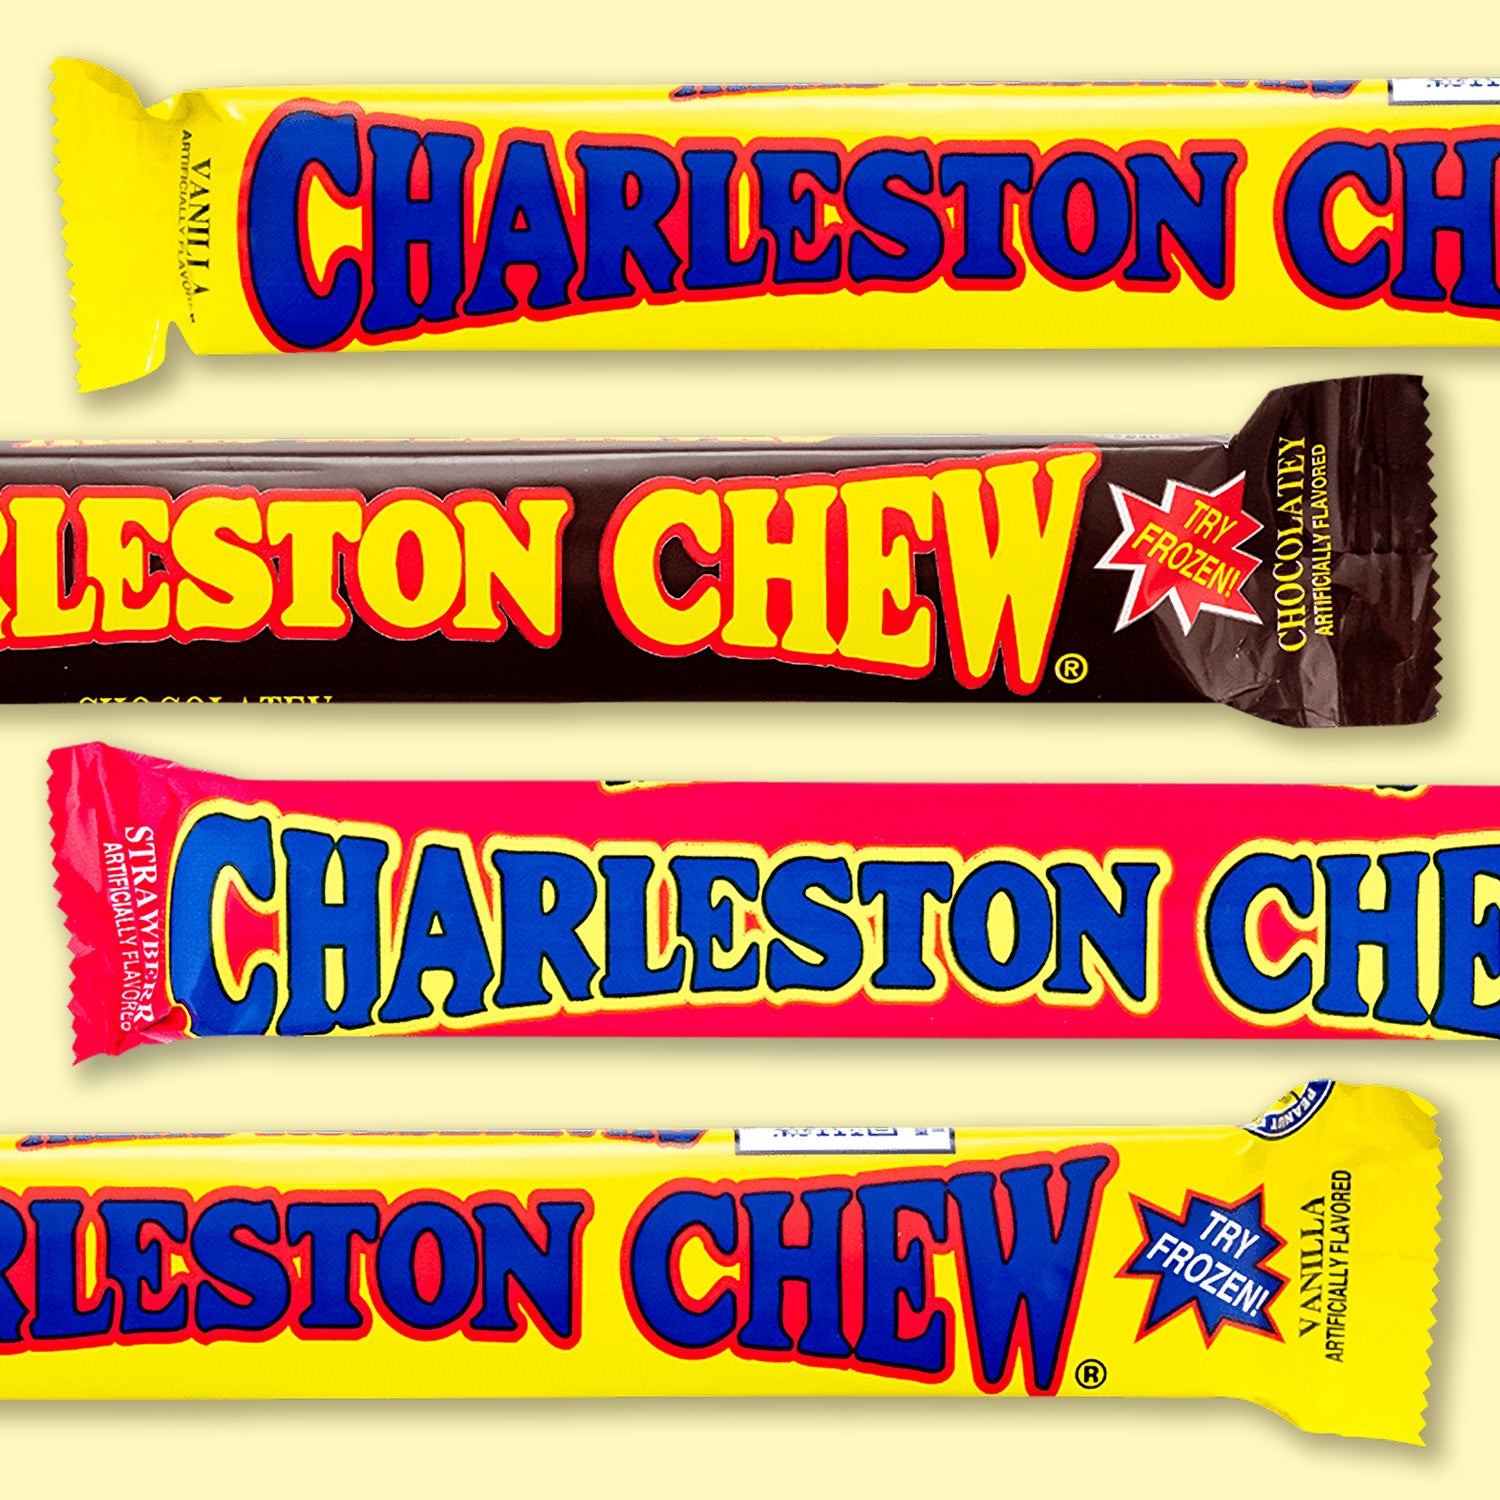 The Best Candy Bars Of All Time According To A Retro Candy Company